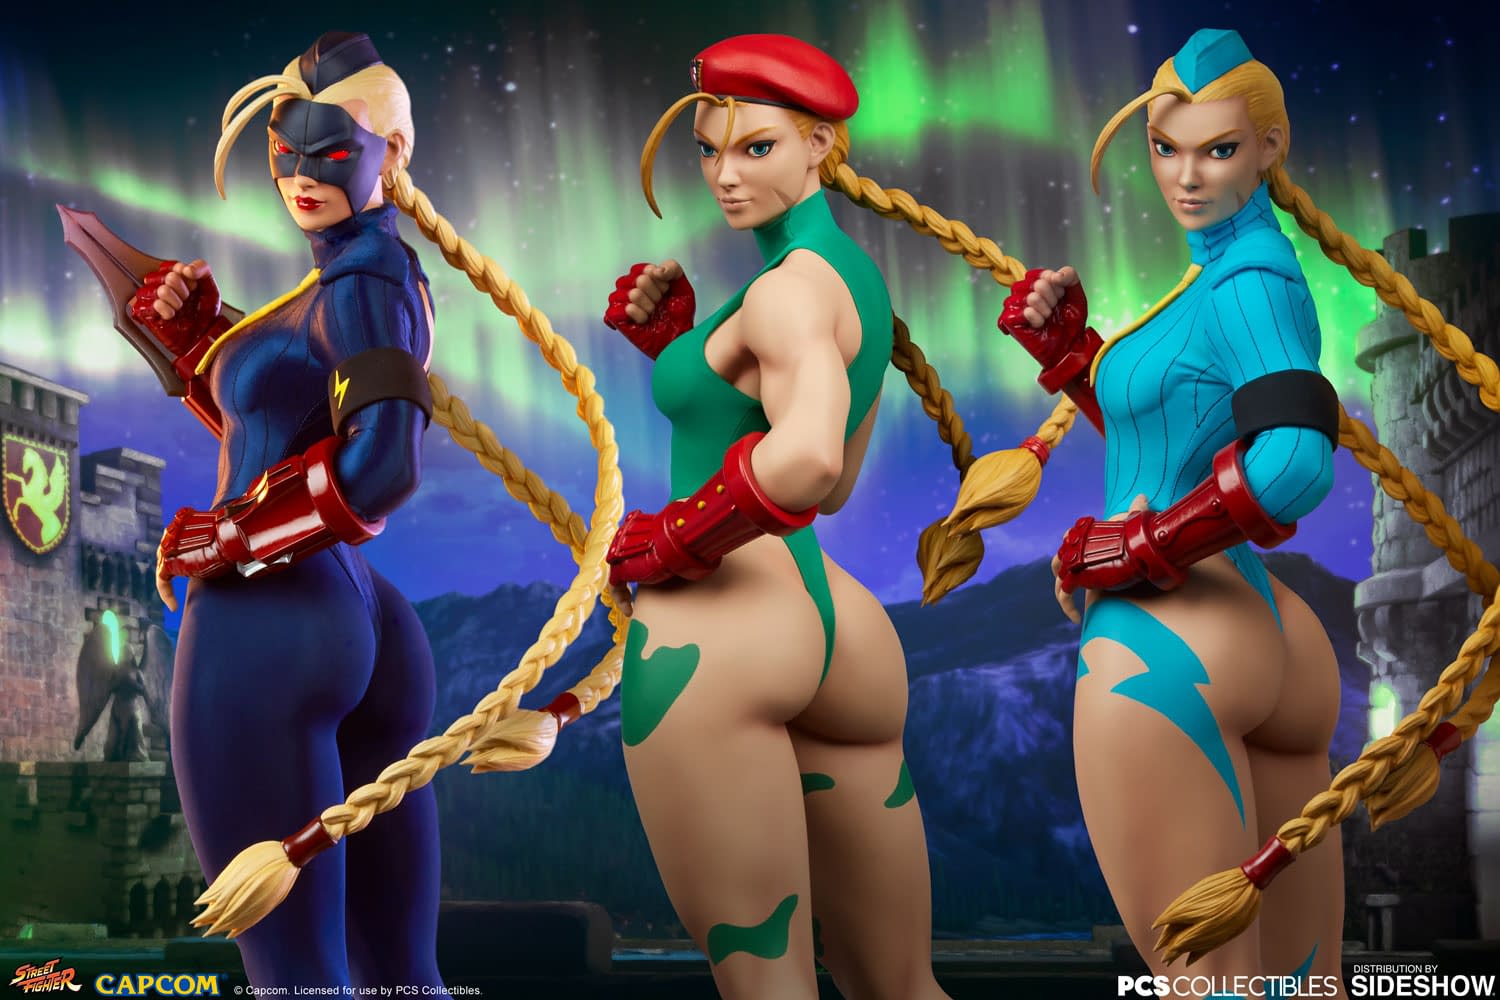 "Street Fighter" Cammy Gets Three New Statues from PCS Collectibles